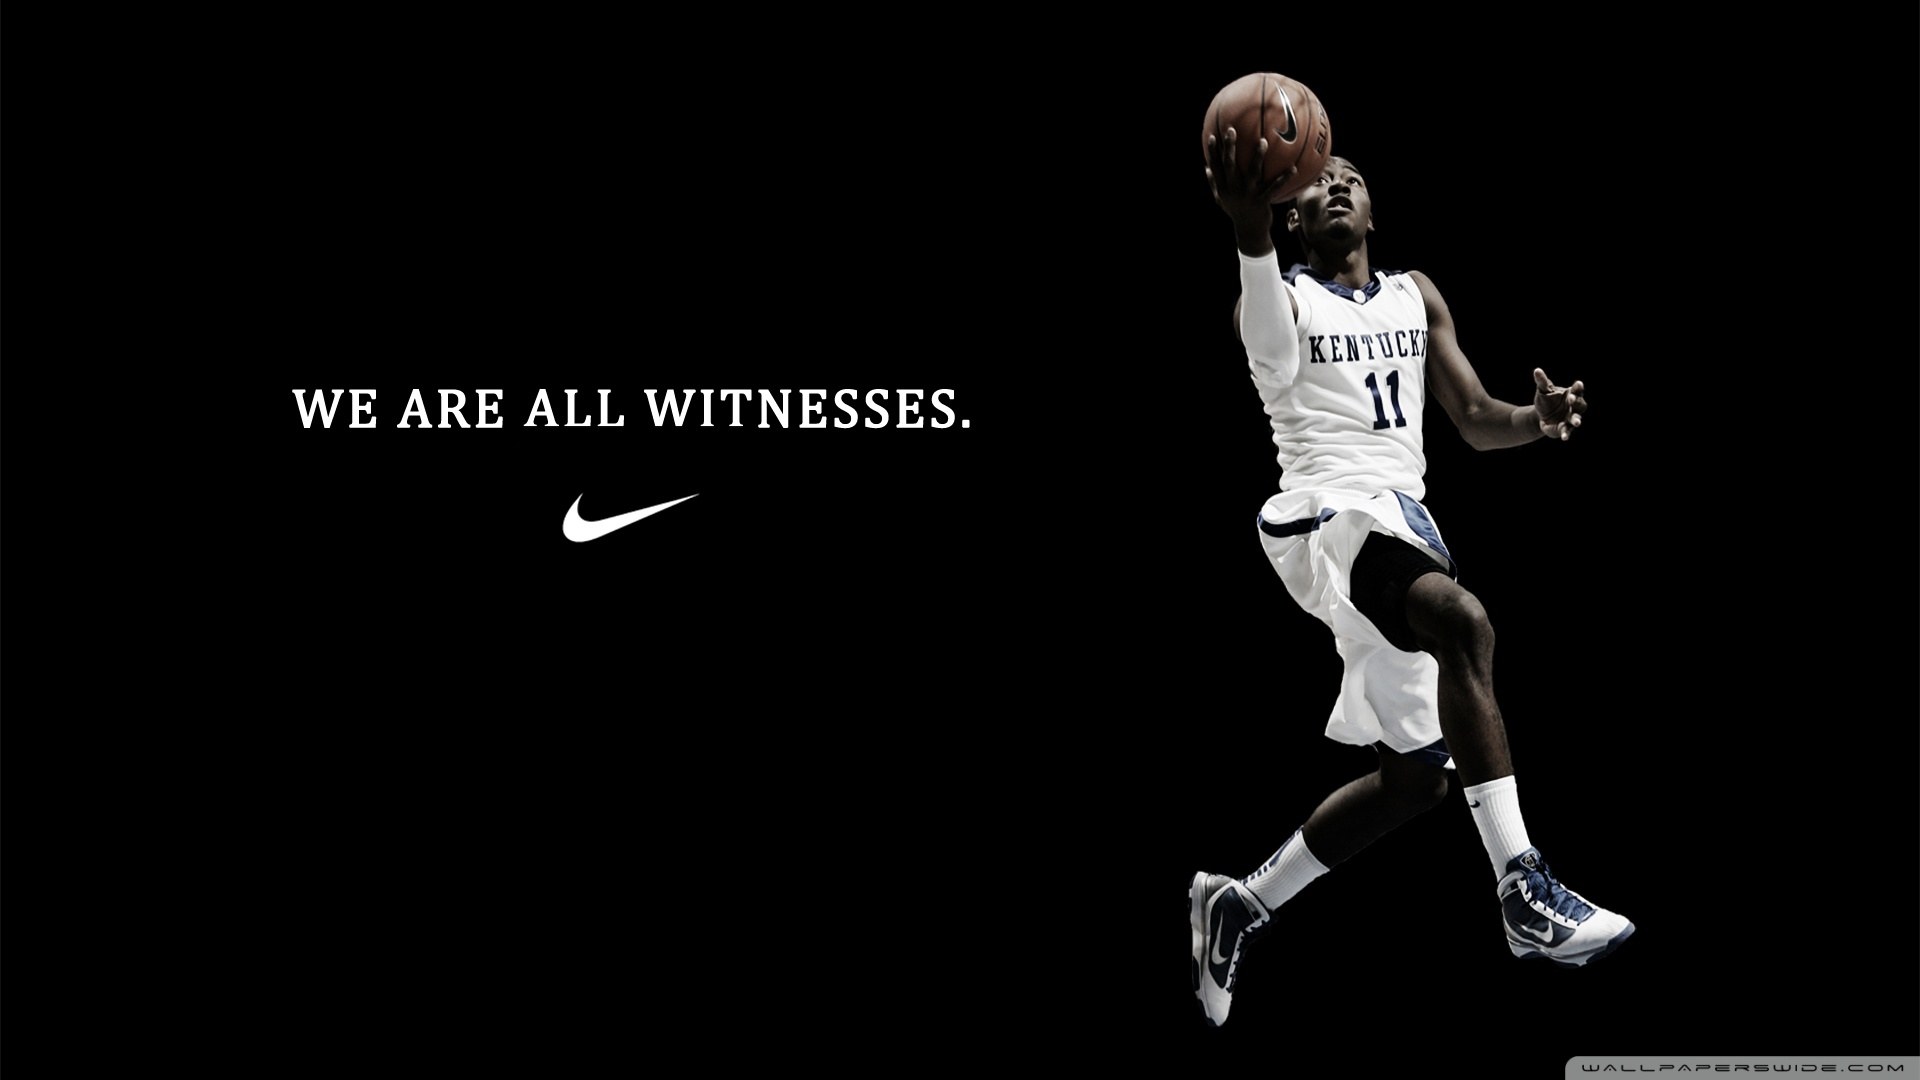 Witness Basketball Quotes. QuotesGram